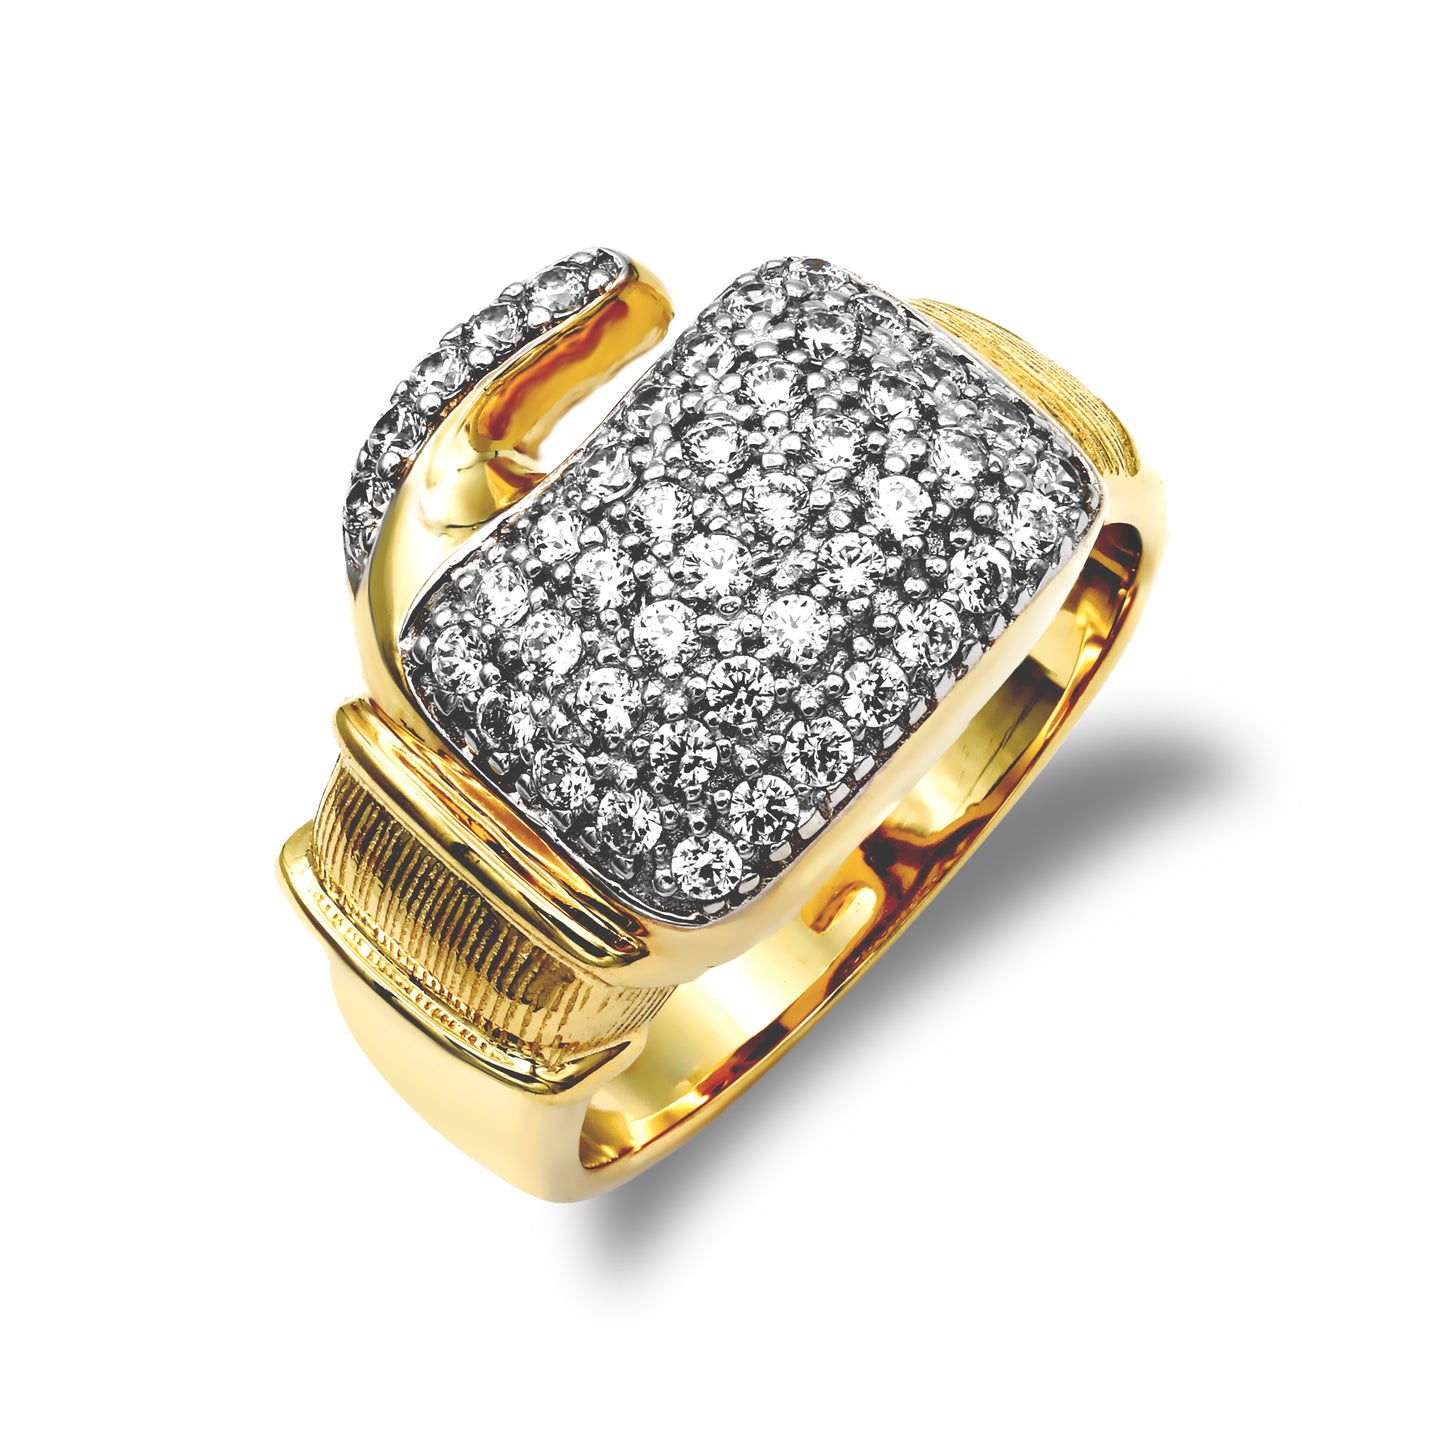 Mens 9ct Gold  CZ Pave Boxing Glove Novelty Ring - JRN038